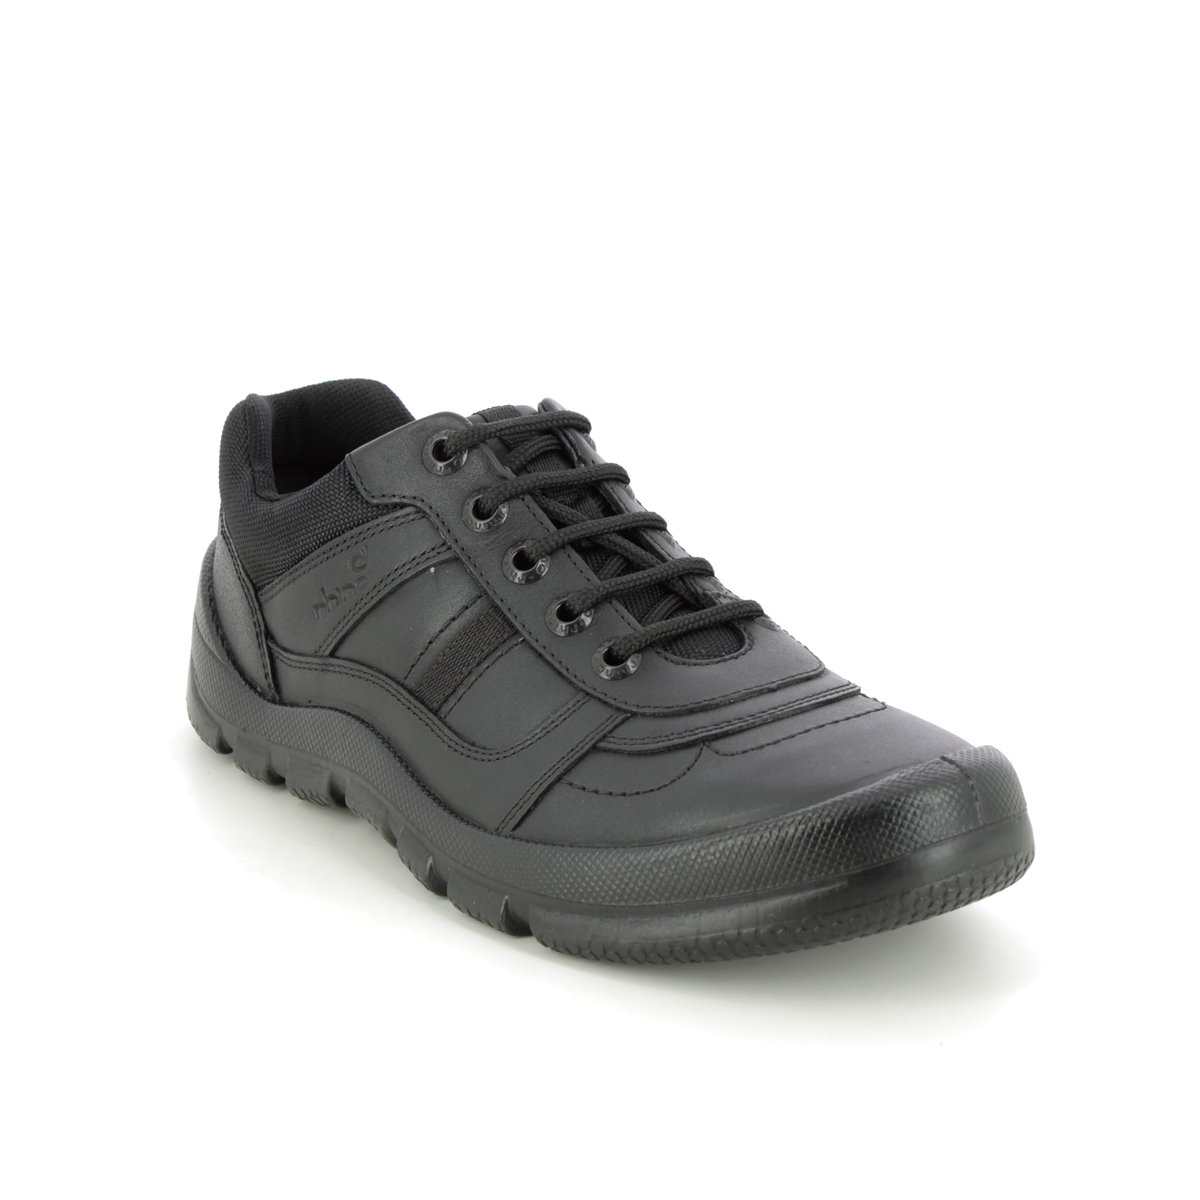 Start Rite - Rhino Warrior Lace In Black Leather 8238-76F In Size 5.5 In Plain Black Leather For School Boys Shoes  In Black Leather For kids